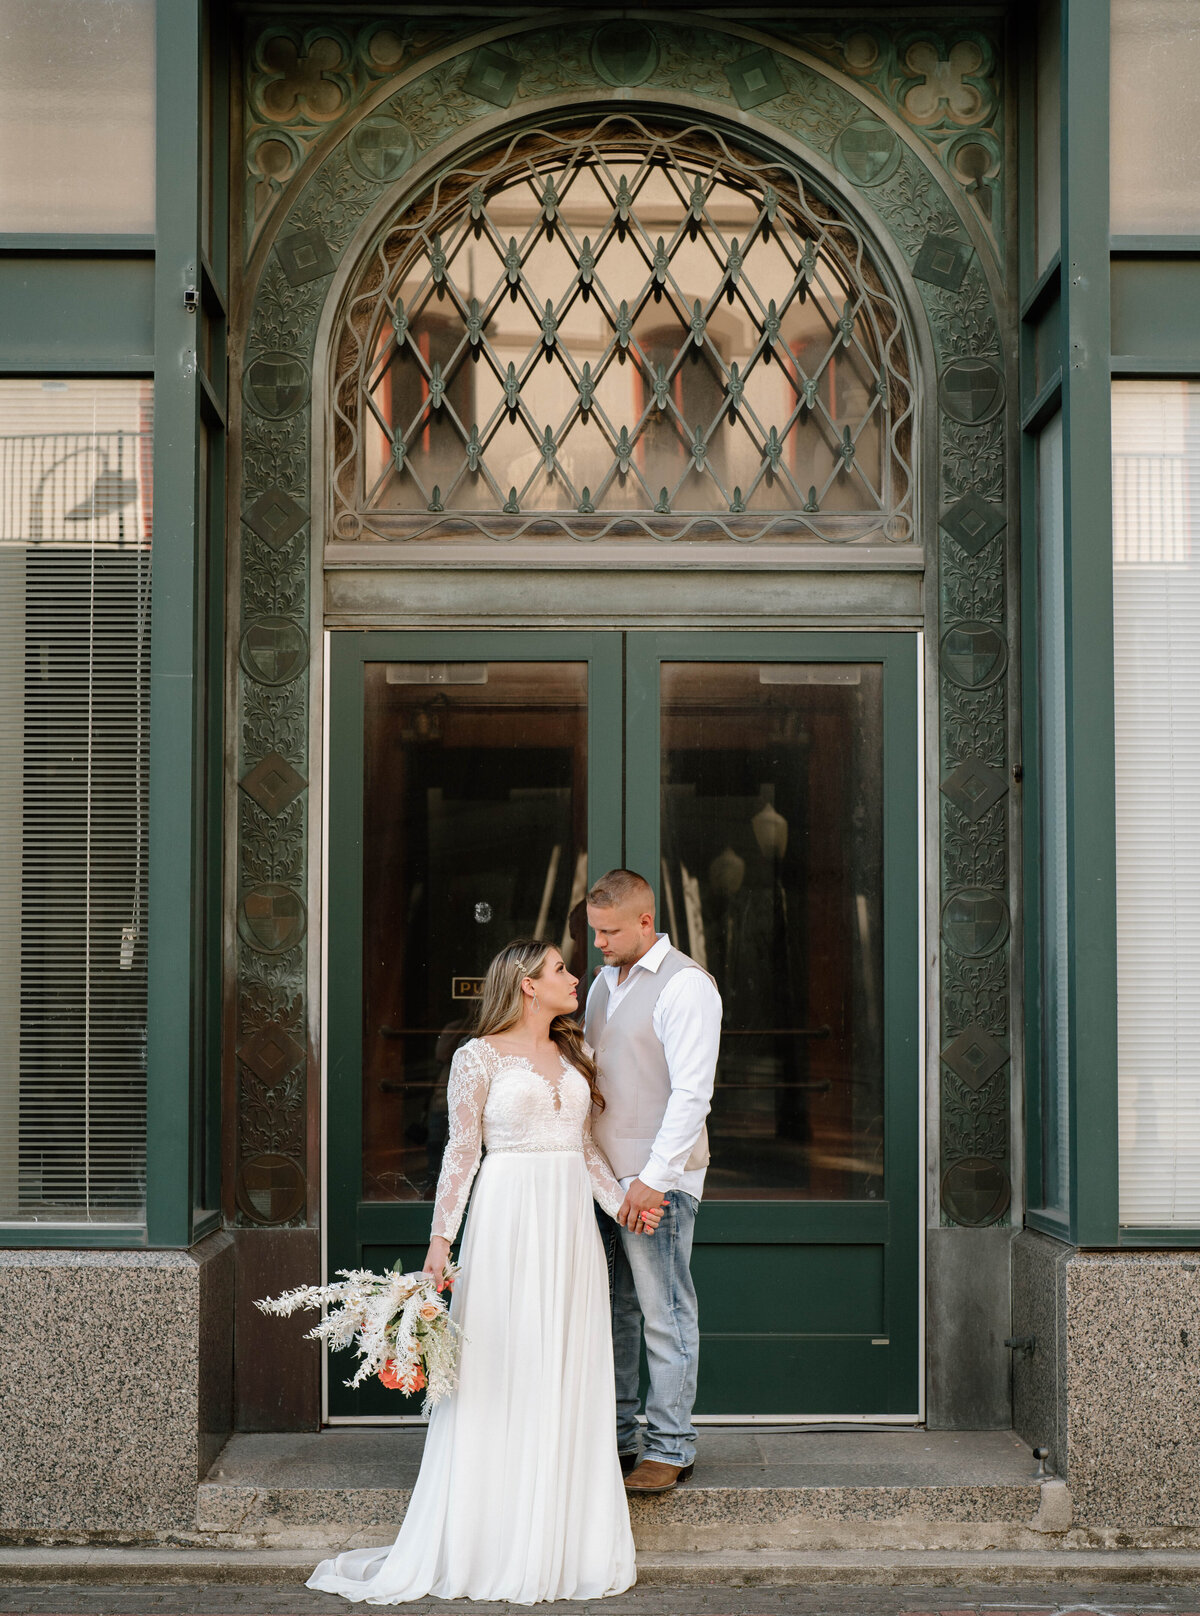 Downtown beaumont_couples wedding Session-Courtney LaSalle Photography-12